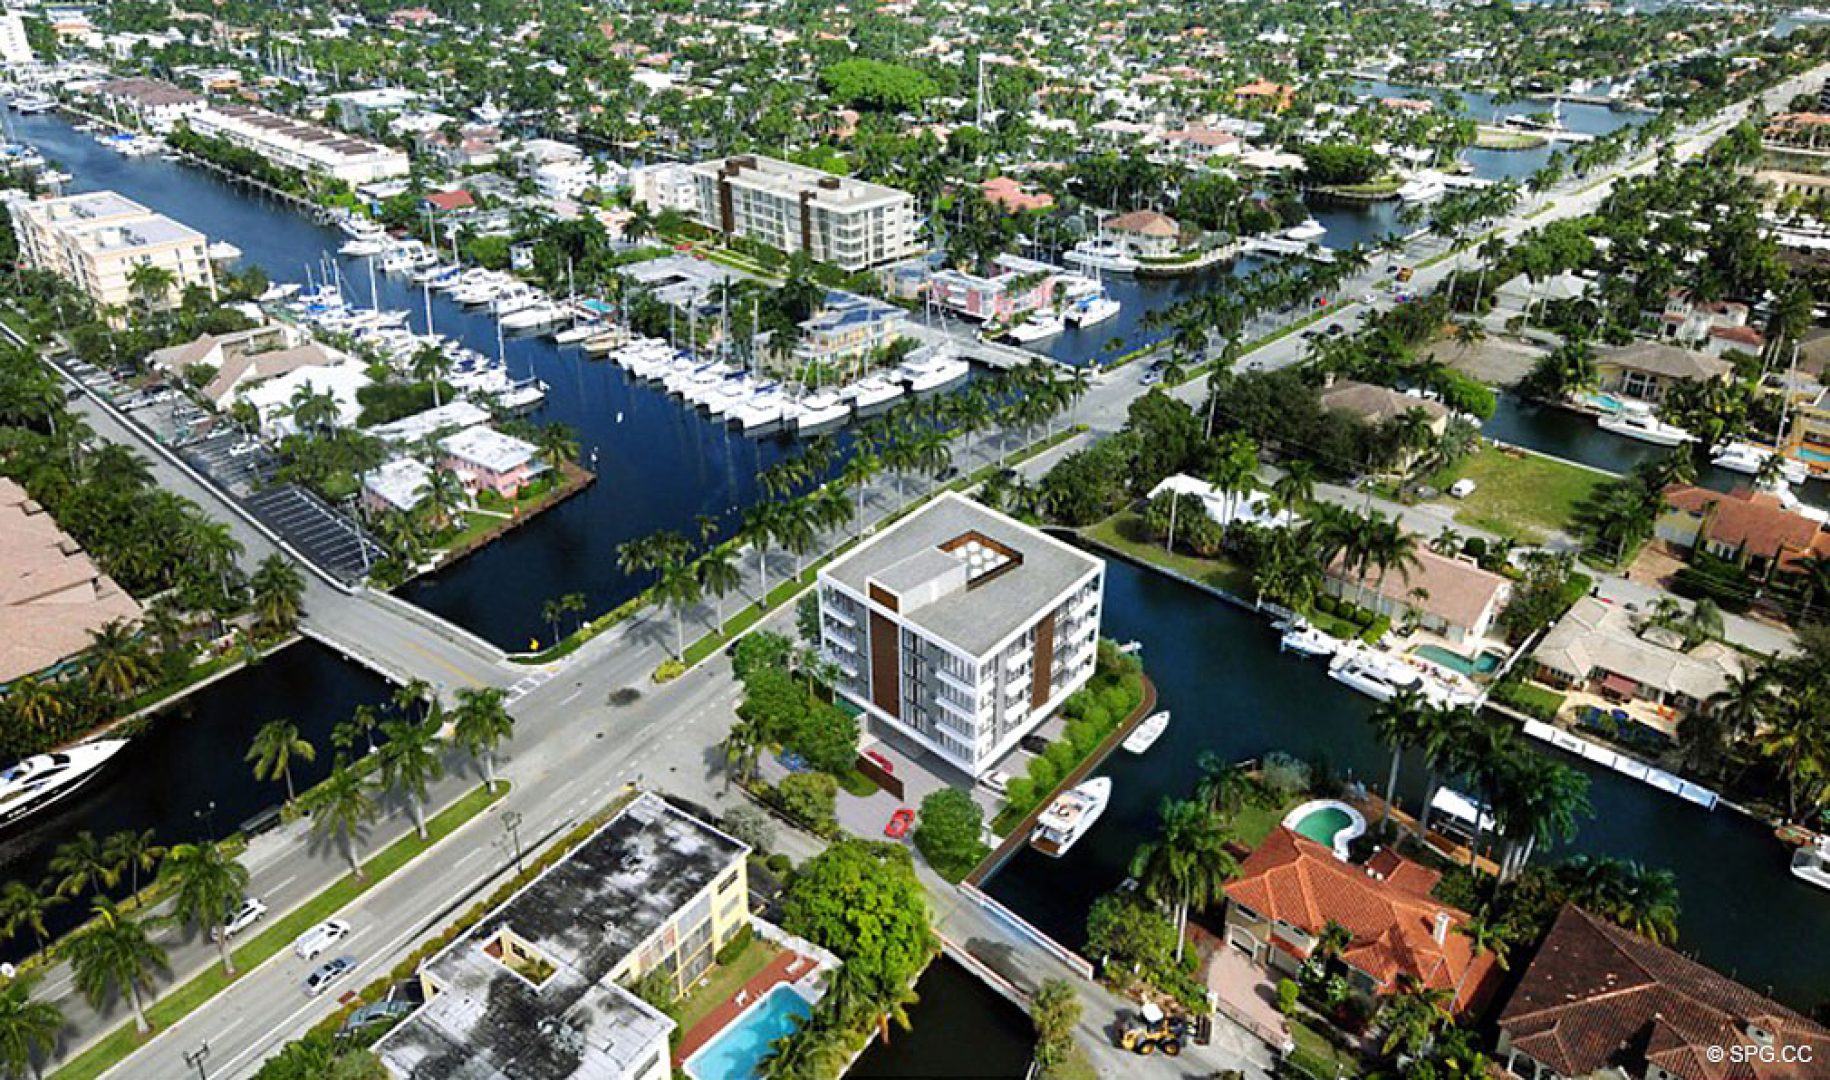 Expanded Aerial View of 1800 Las Olas, Luxury Waterfront Condos in Fort Lauderdale, Florida 33301